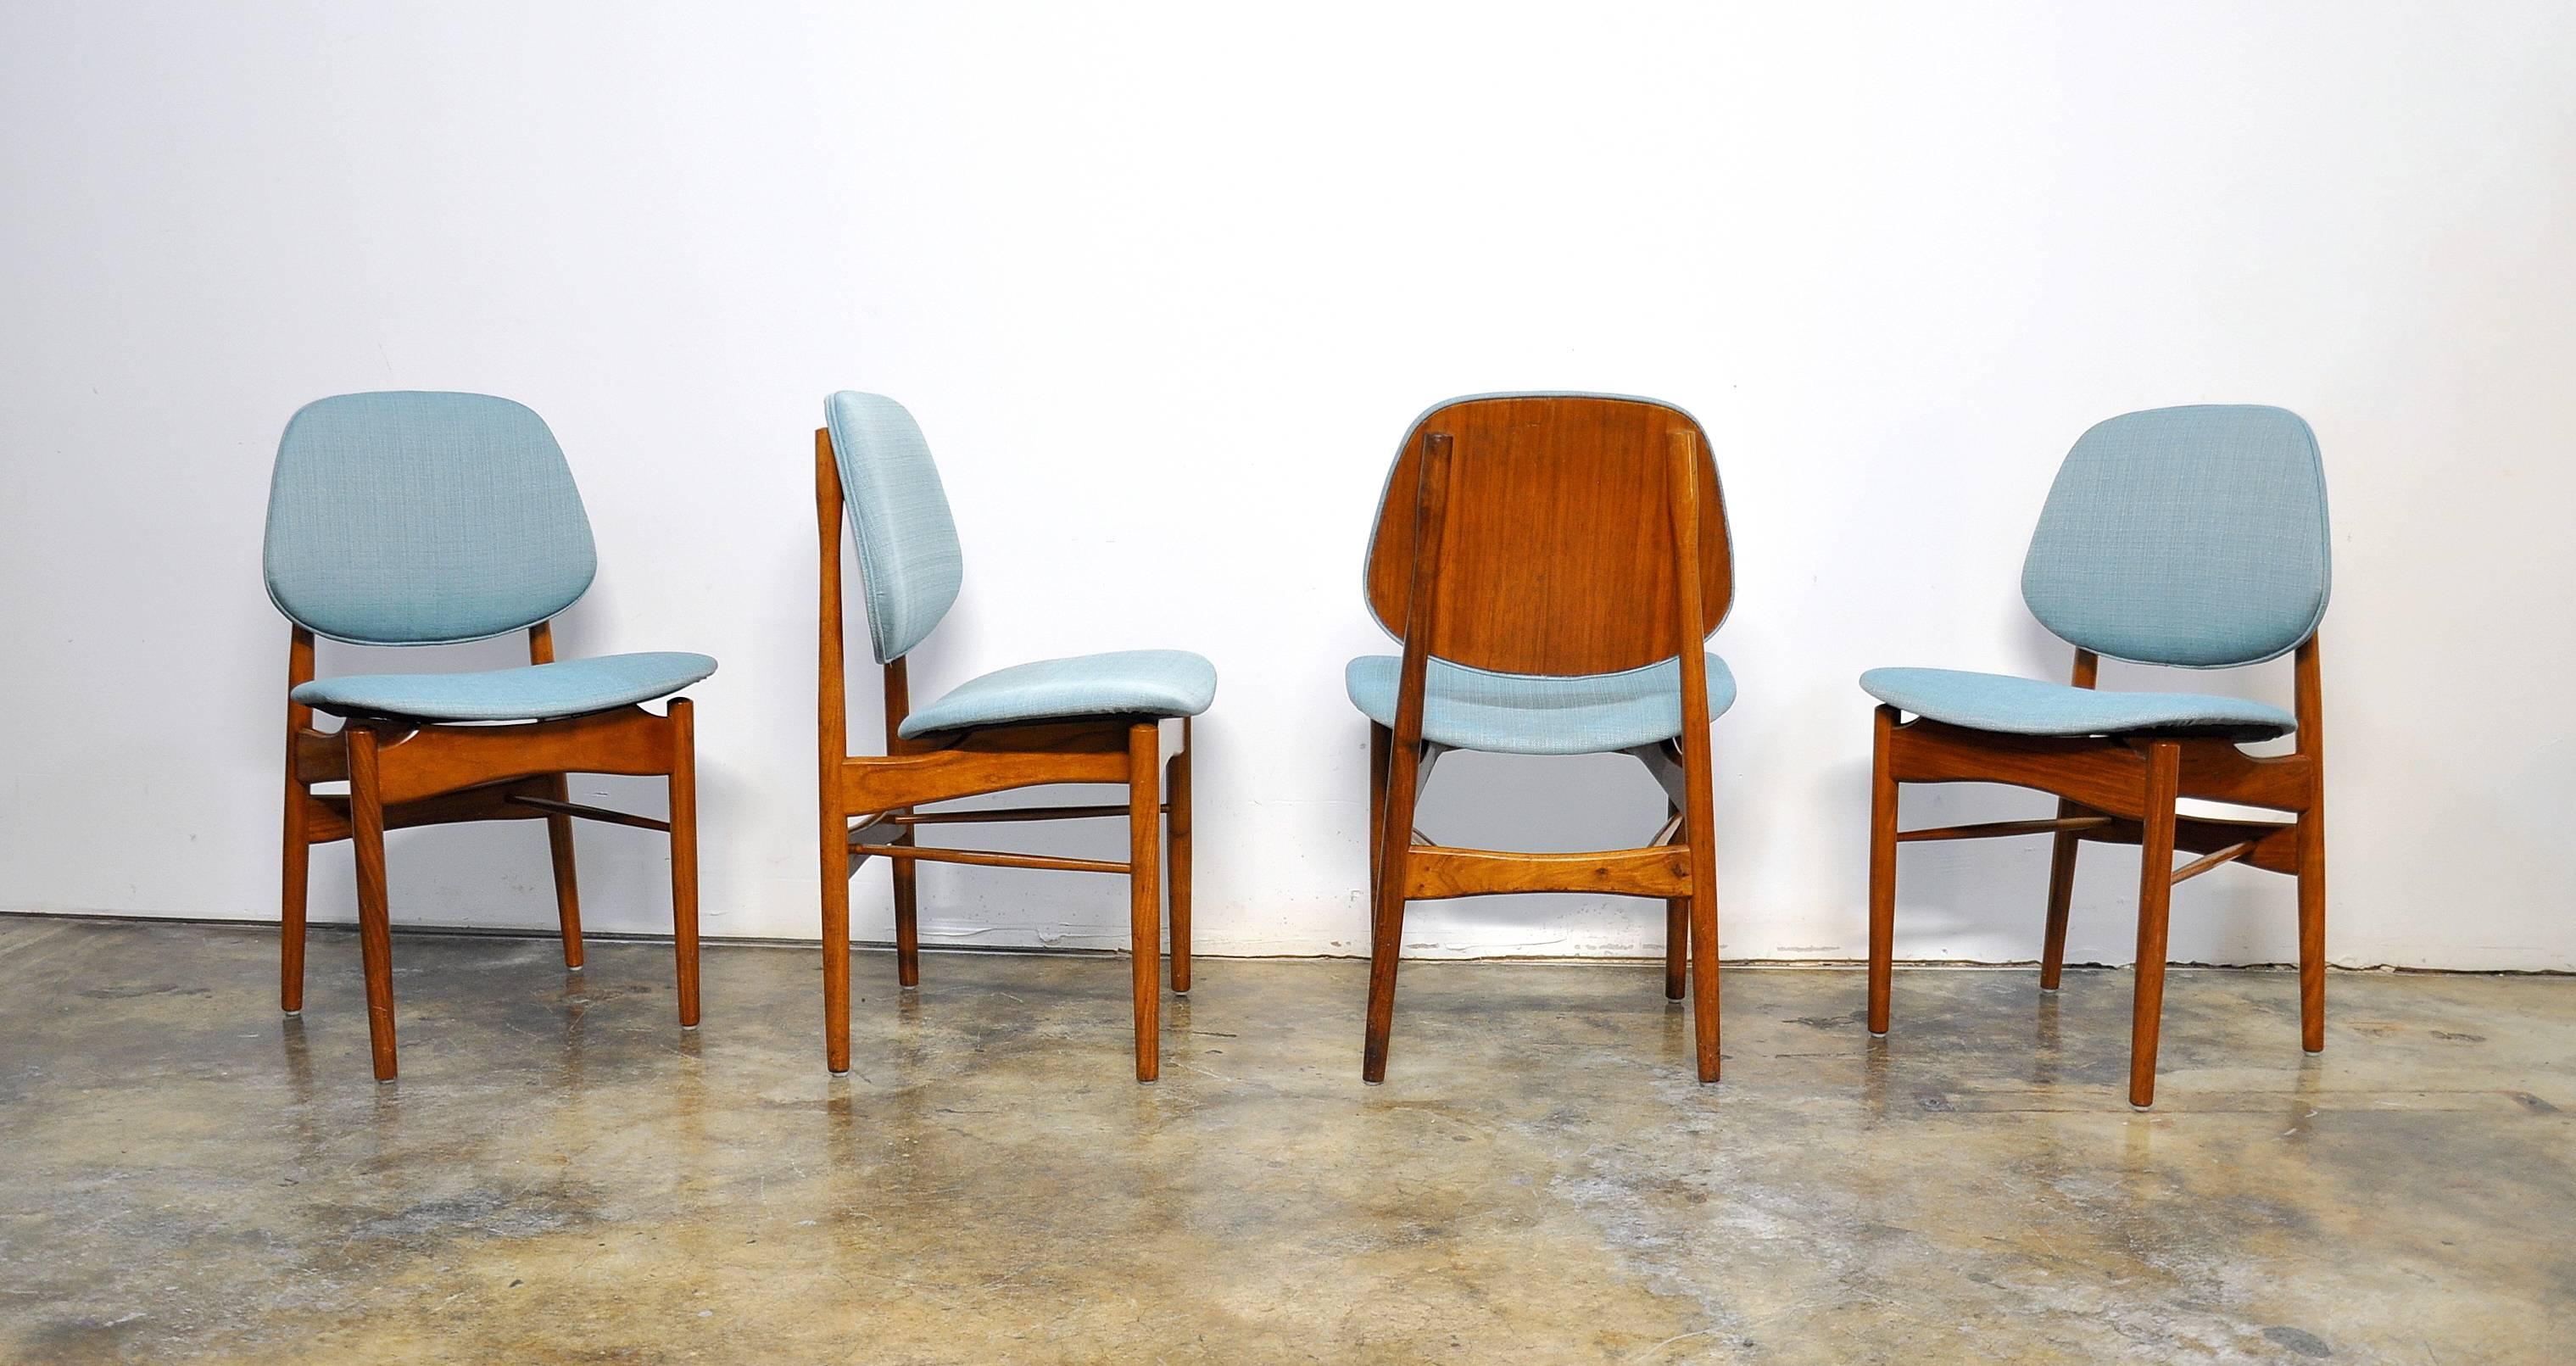 Rare and early set of Mid-Century teak dining chairs with floating seats and curved backrests, typical of Finn Juhl's designs. The frames are in original condition with rich patina and have been newly fitted with a light turquoise fabric. The chairs